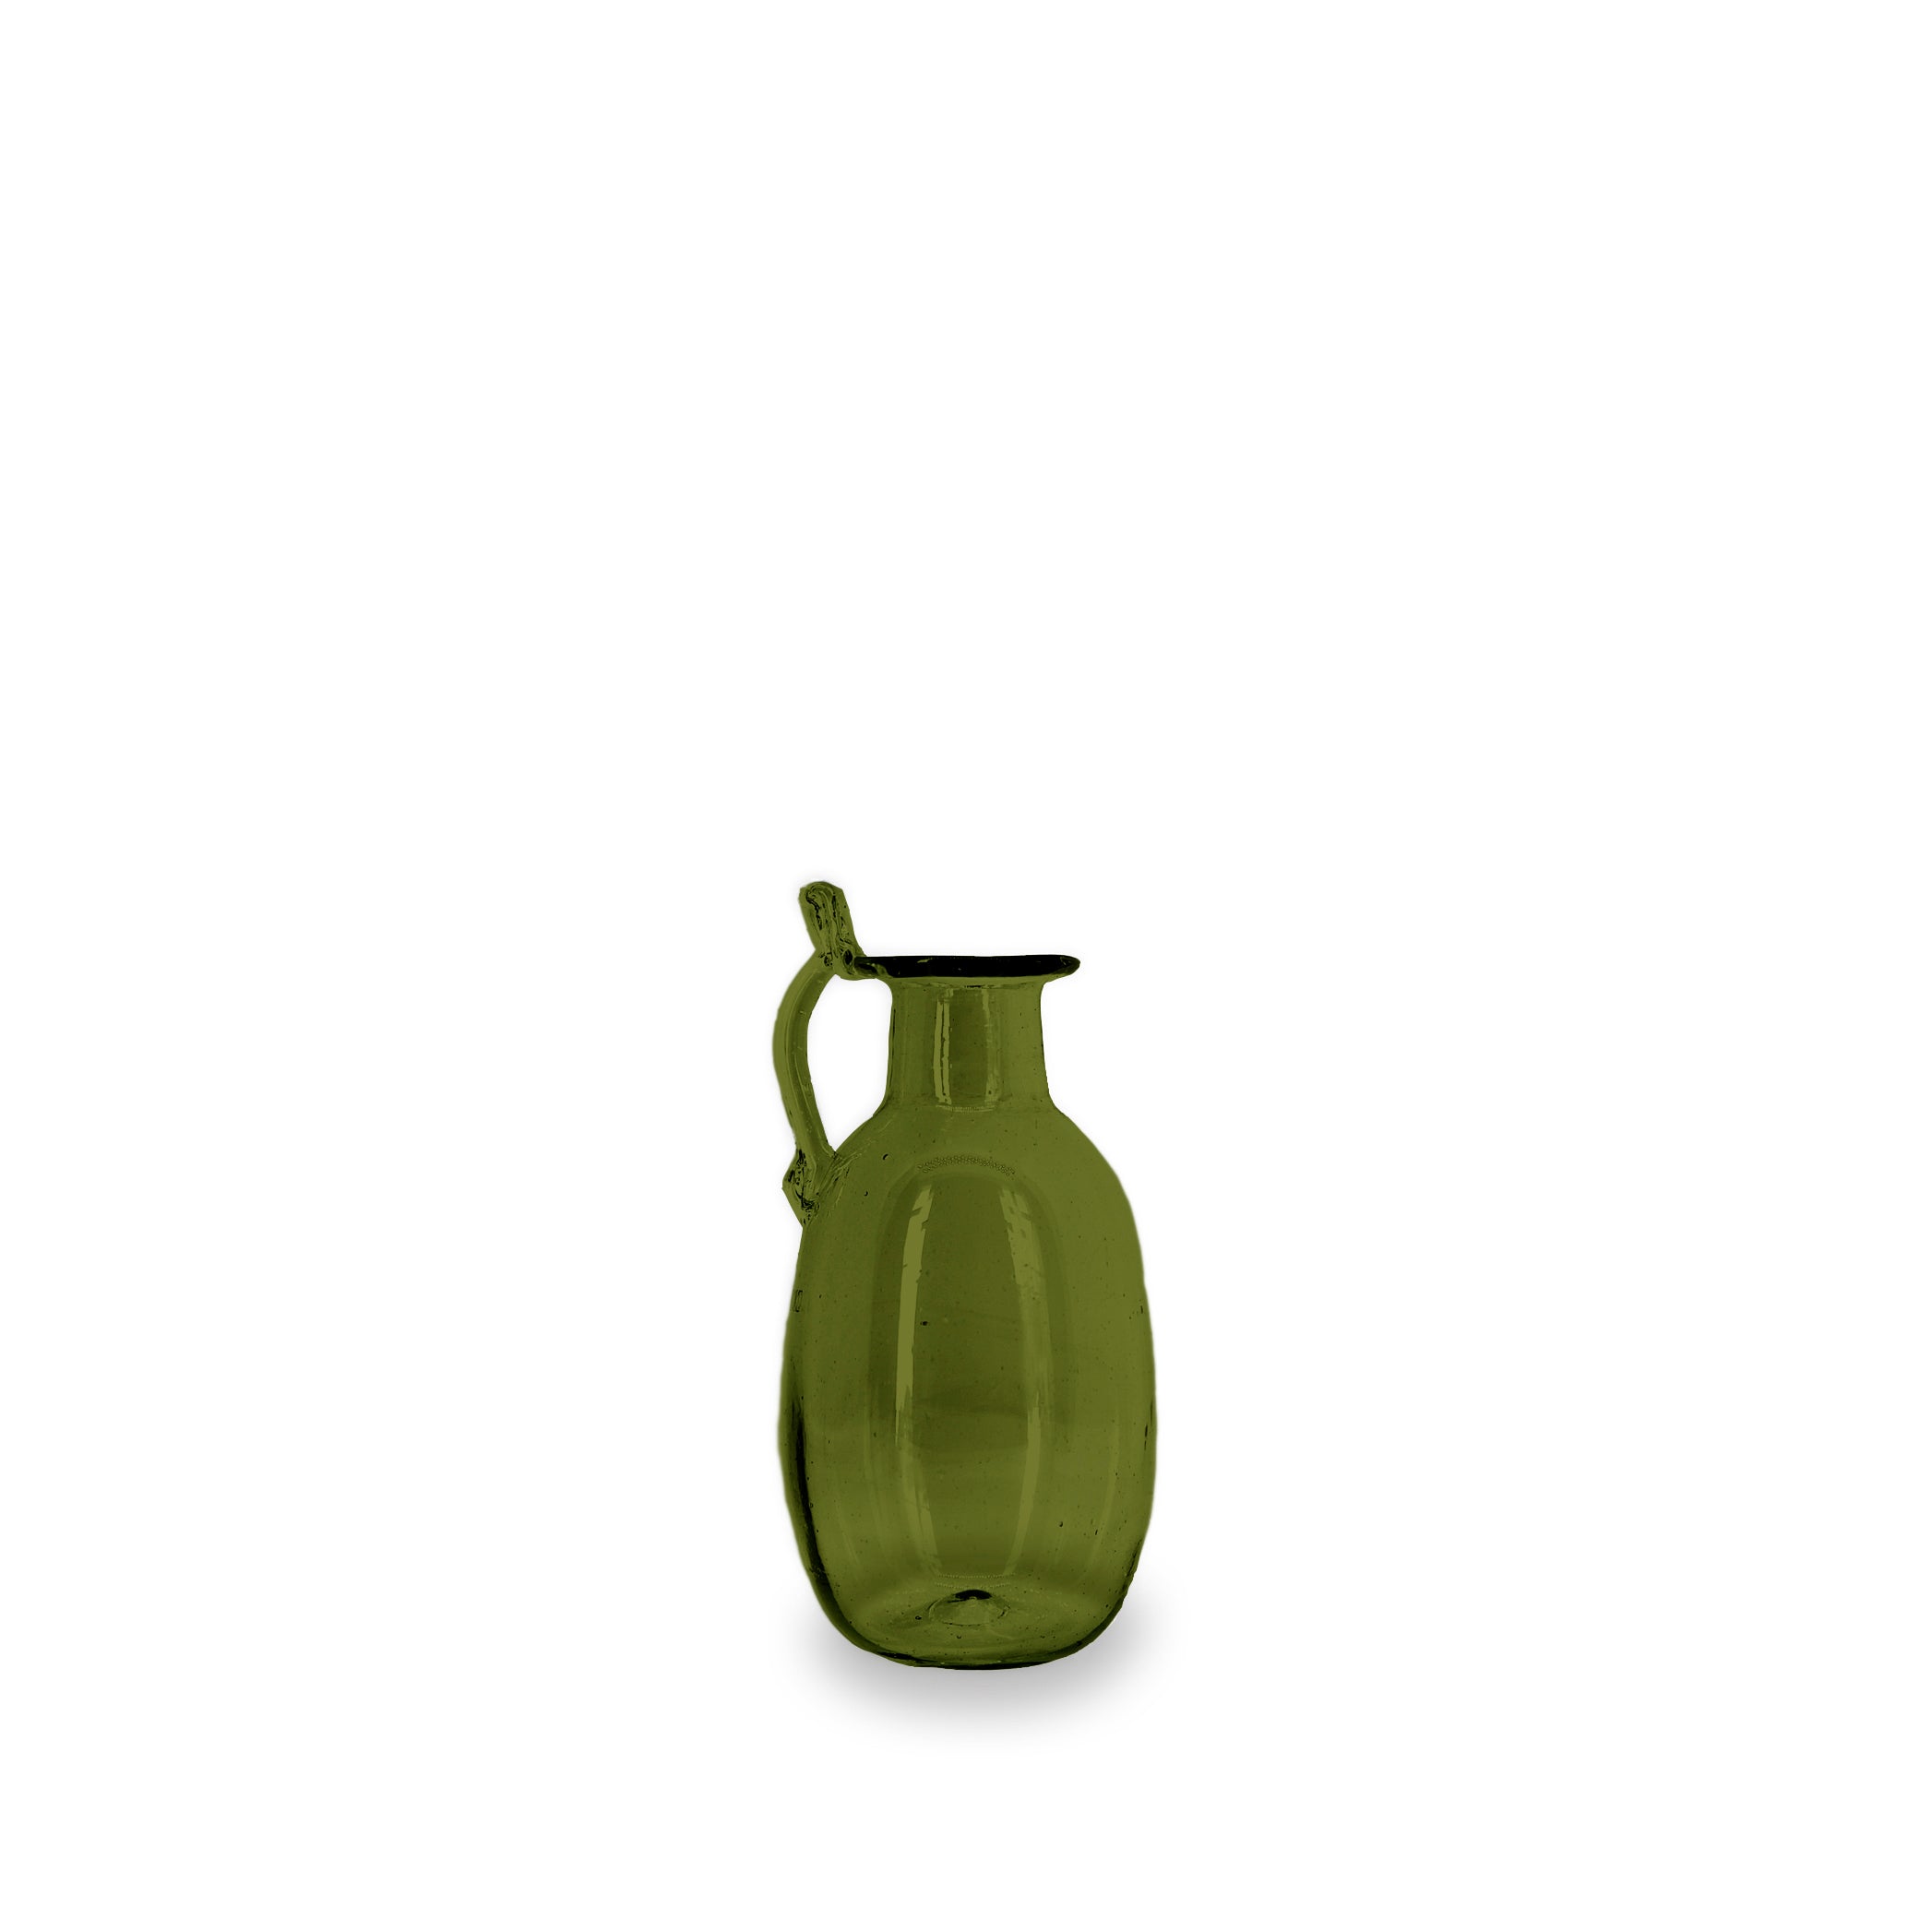 Handblown Glass Amour Vase with Handle in Olive Green, 12cm